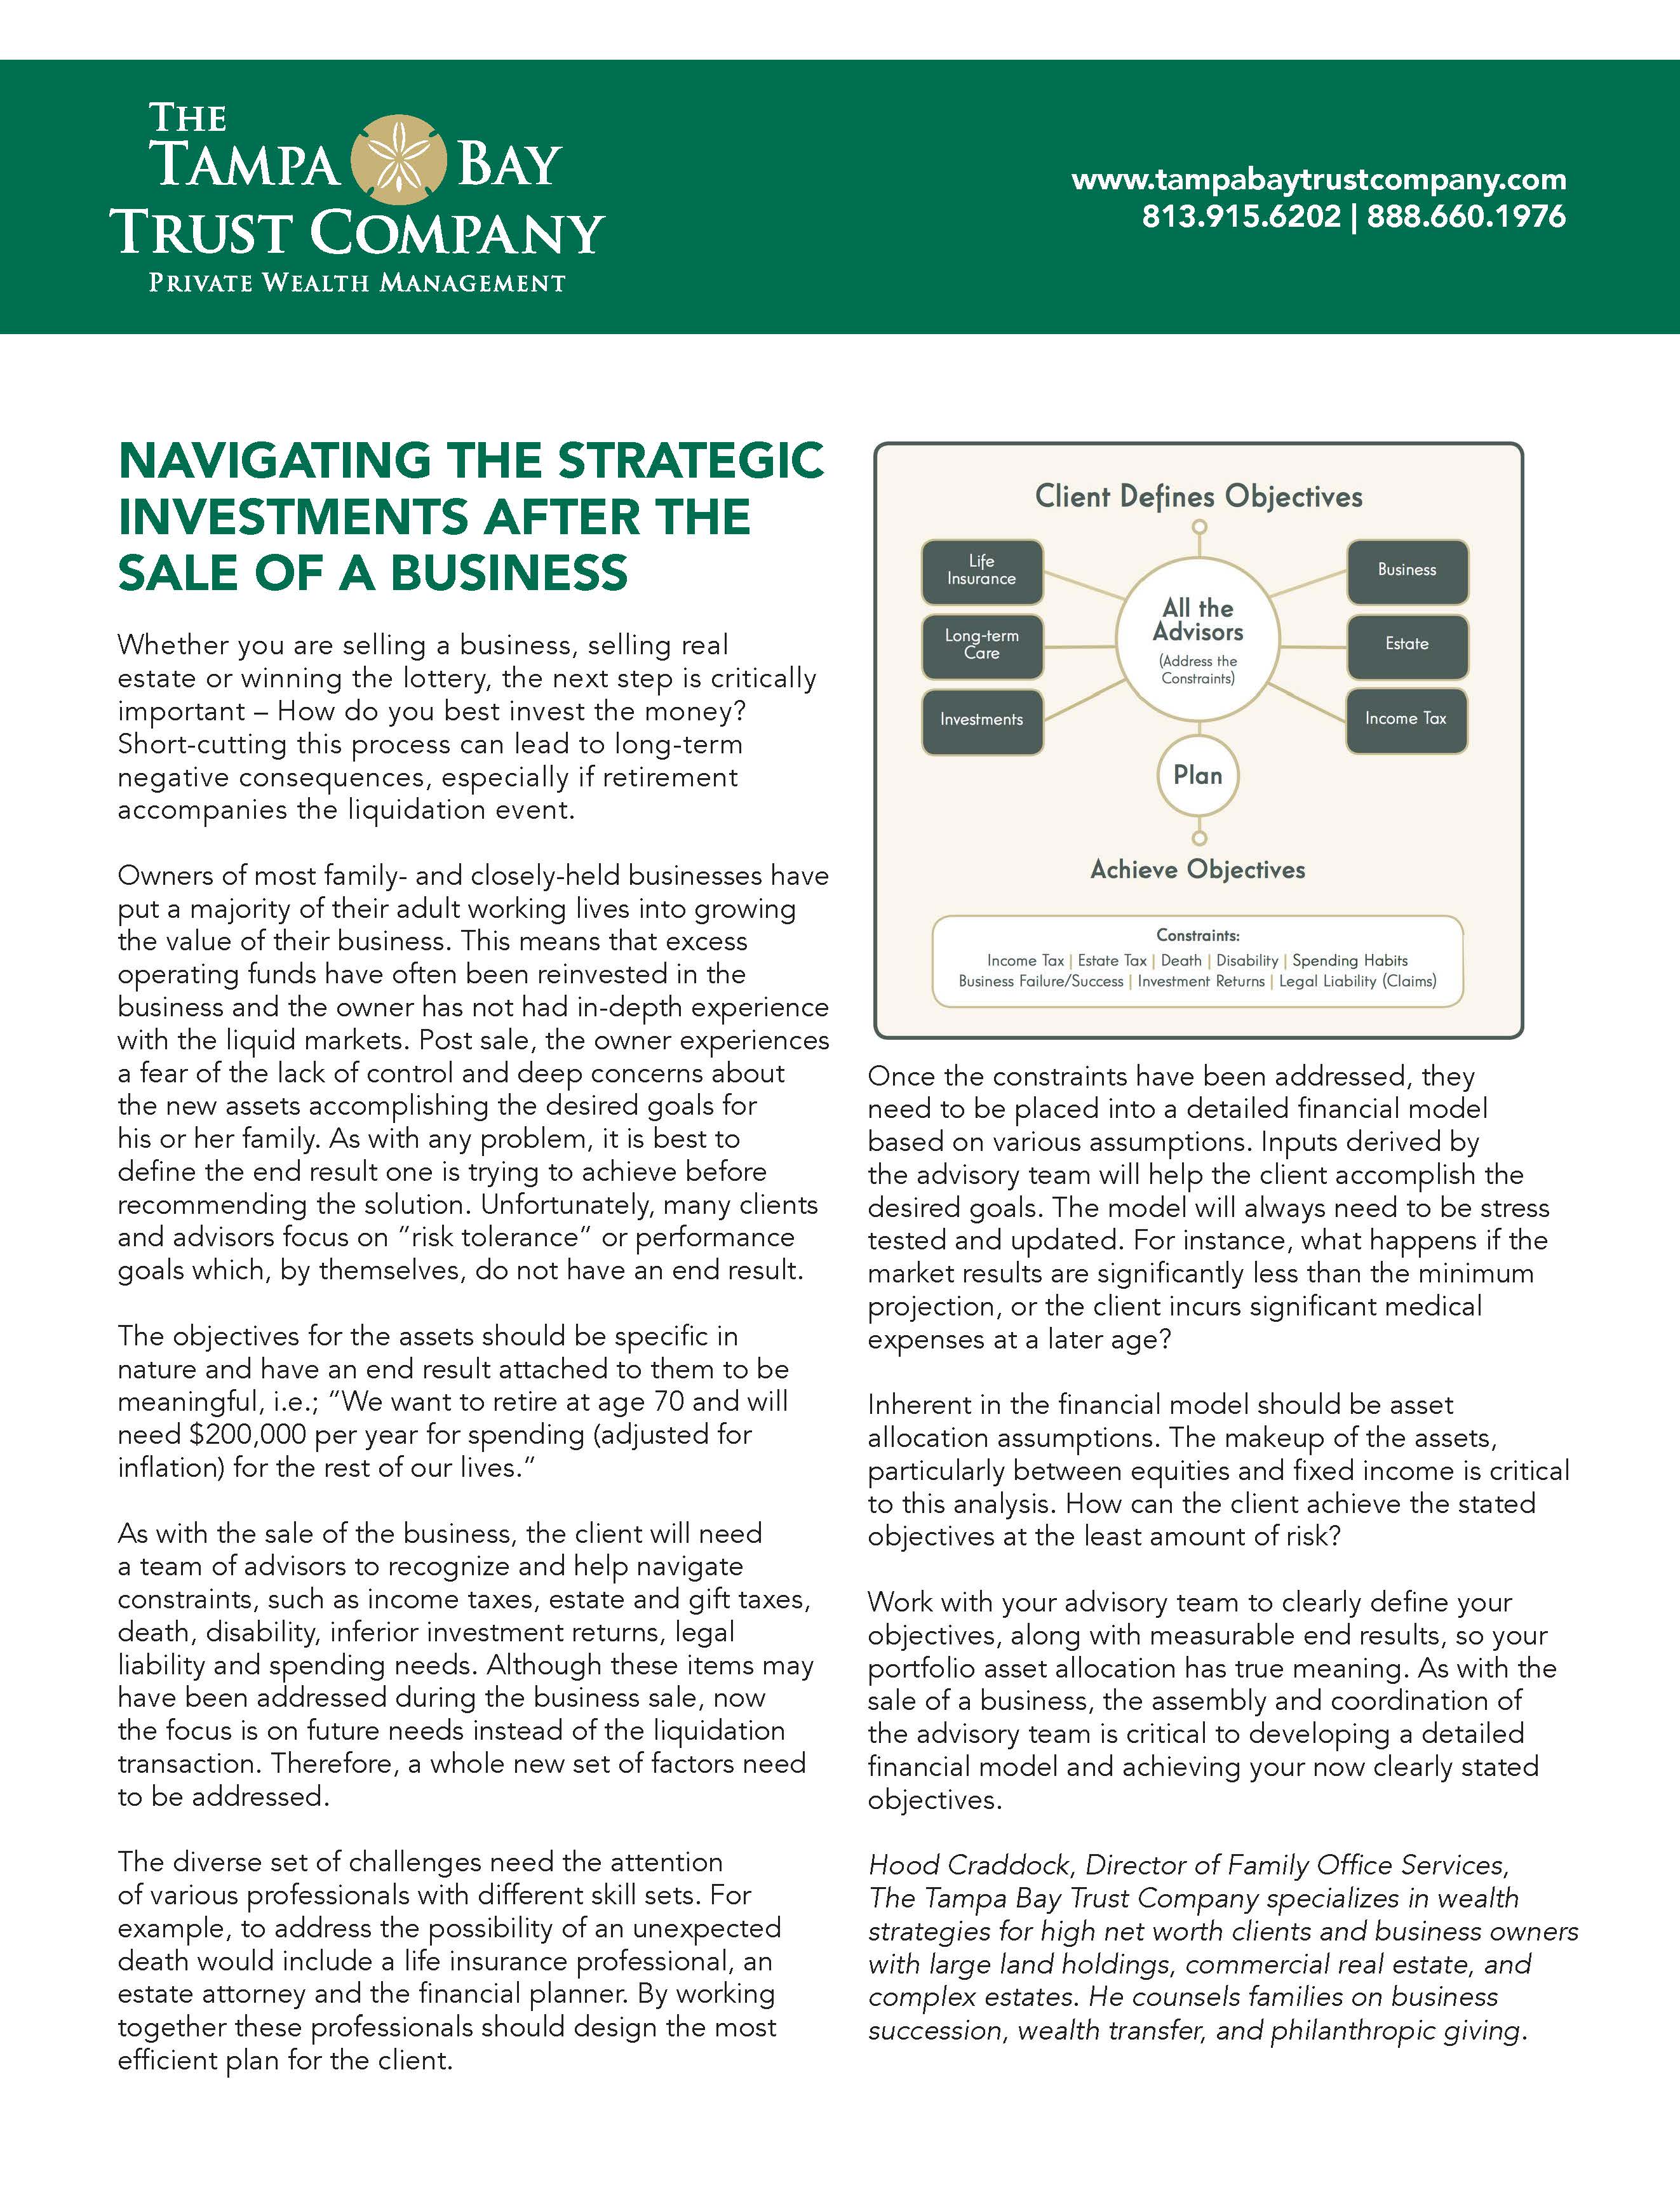 Navigating the strategic investments after the sale of a business infographic